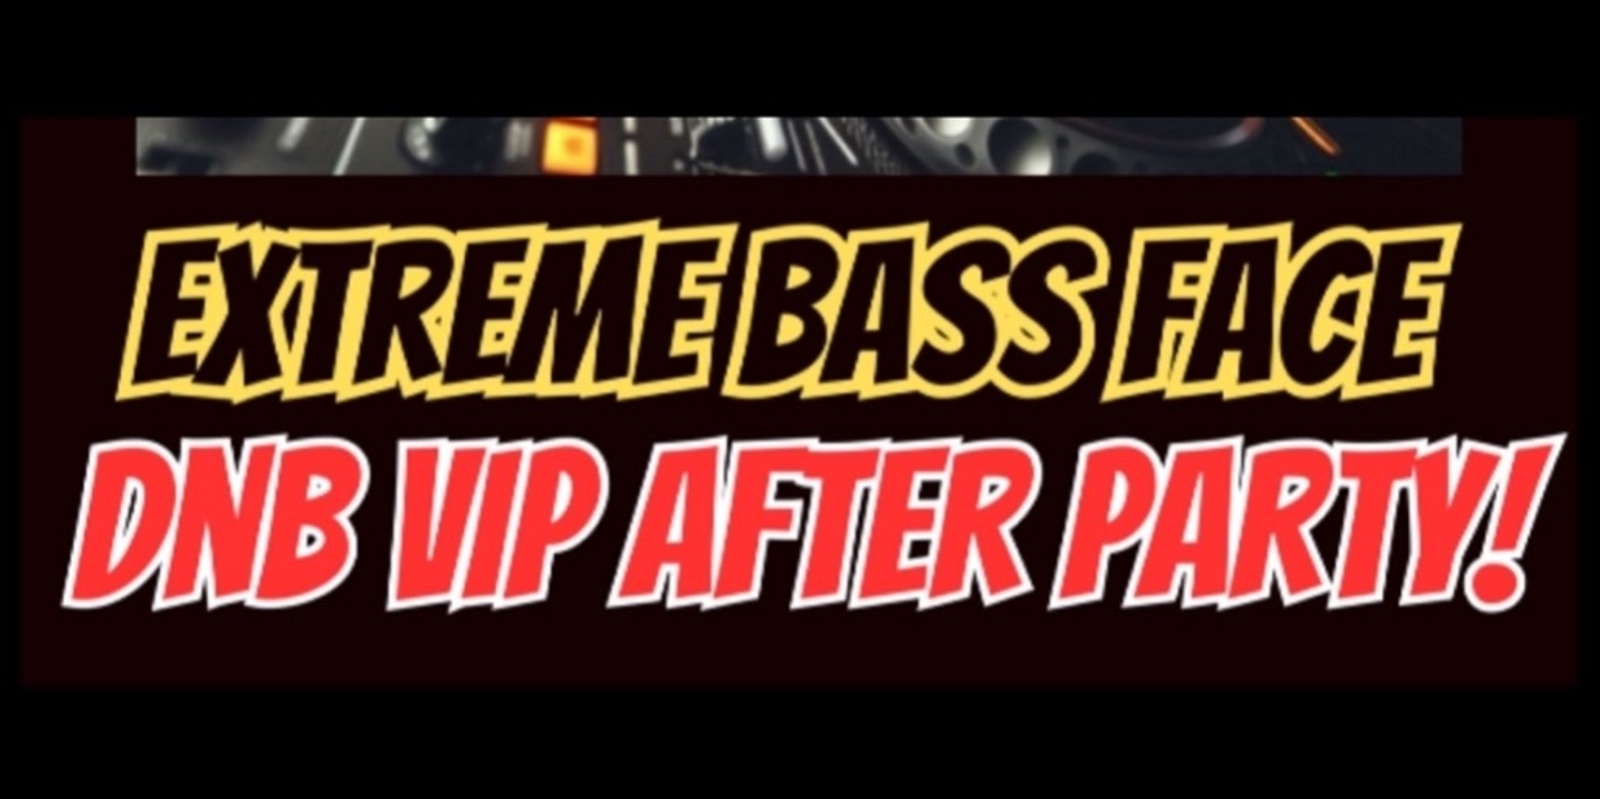 Banner image for Extreme Bass Face DnB VIP After Party